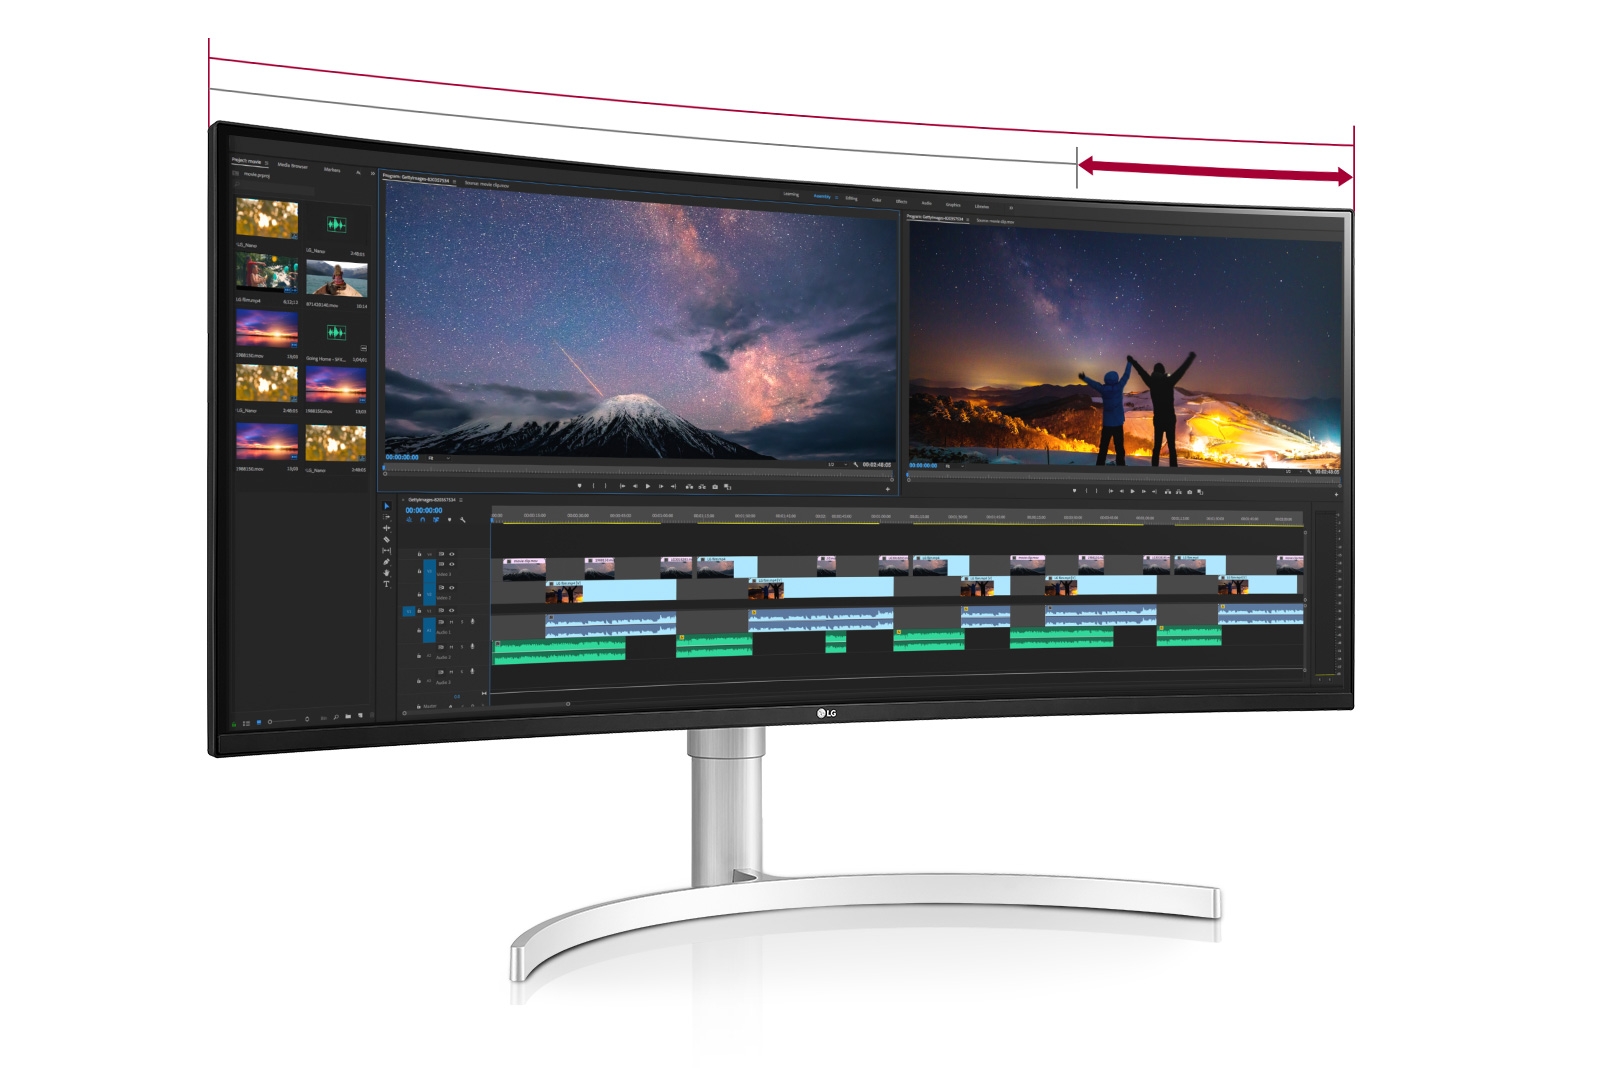 The monitor with aspect ratios of 21:9